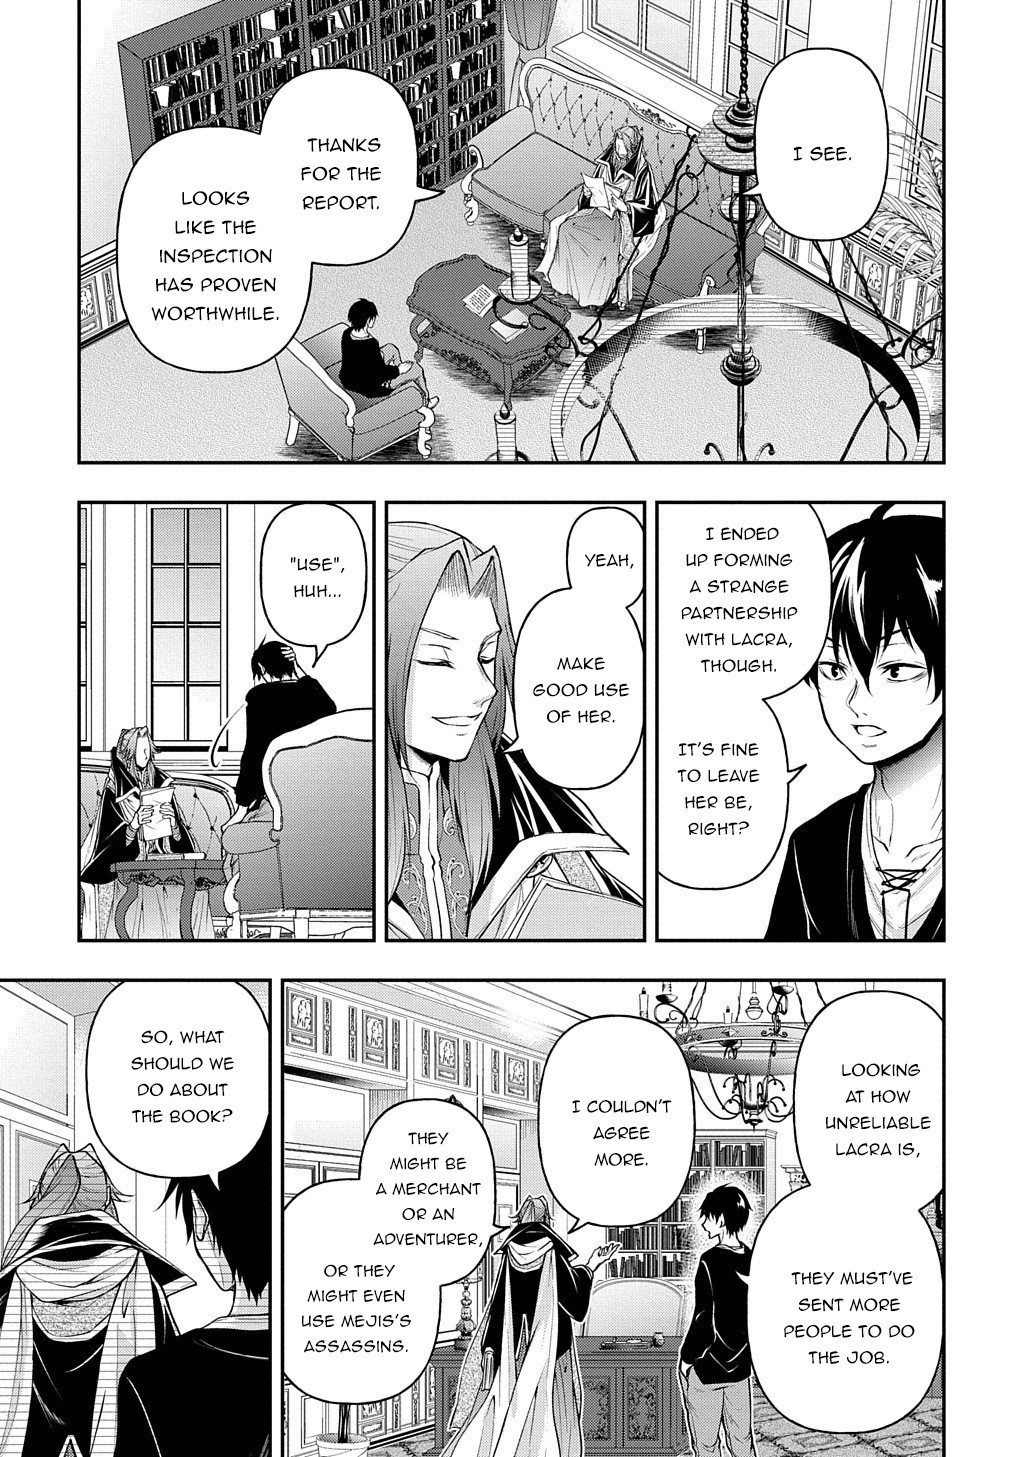 It's Sudden, But I Came To Another World! But I Hope To Live Safely - Page 2